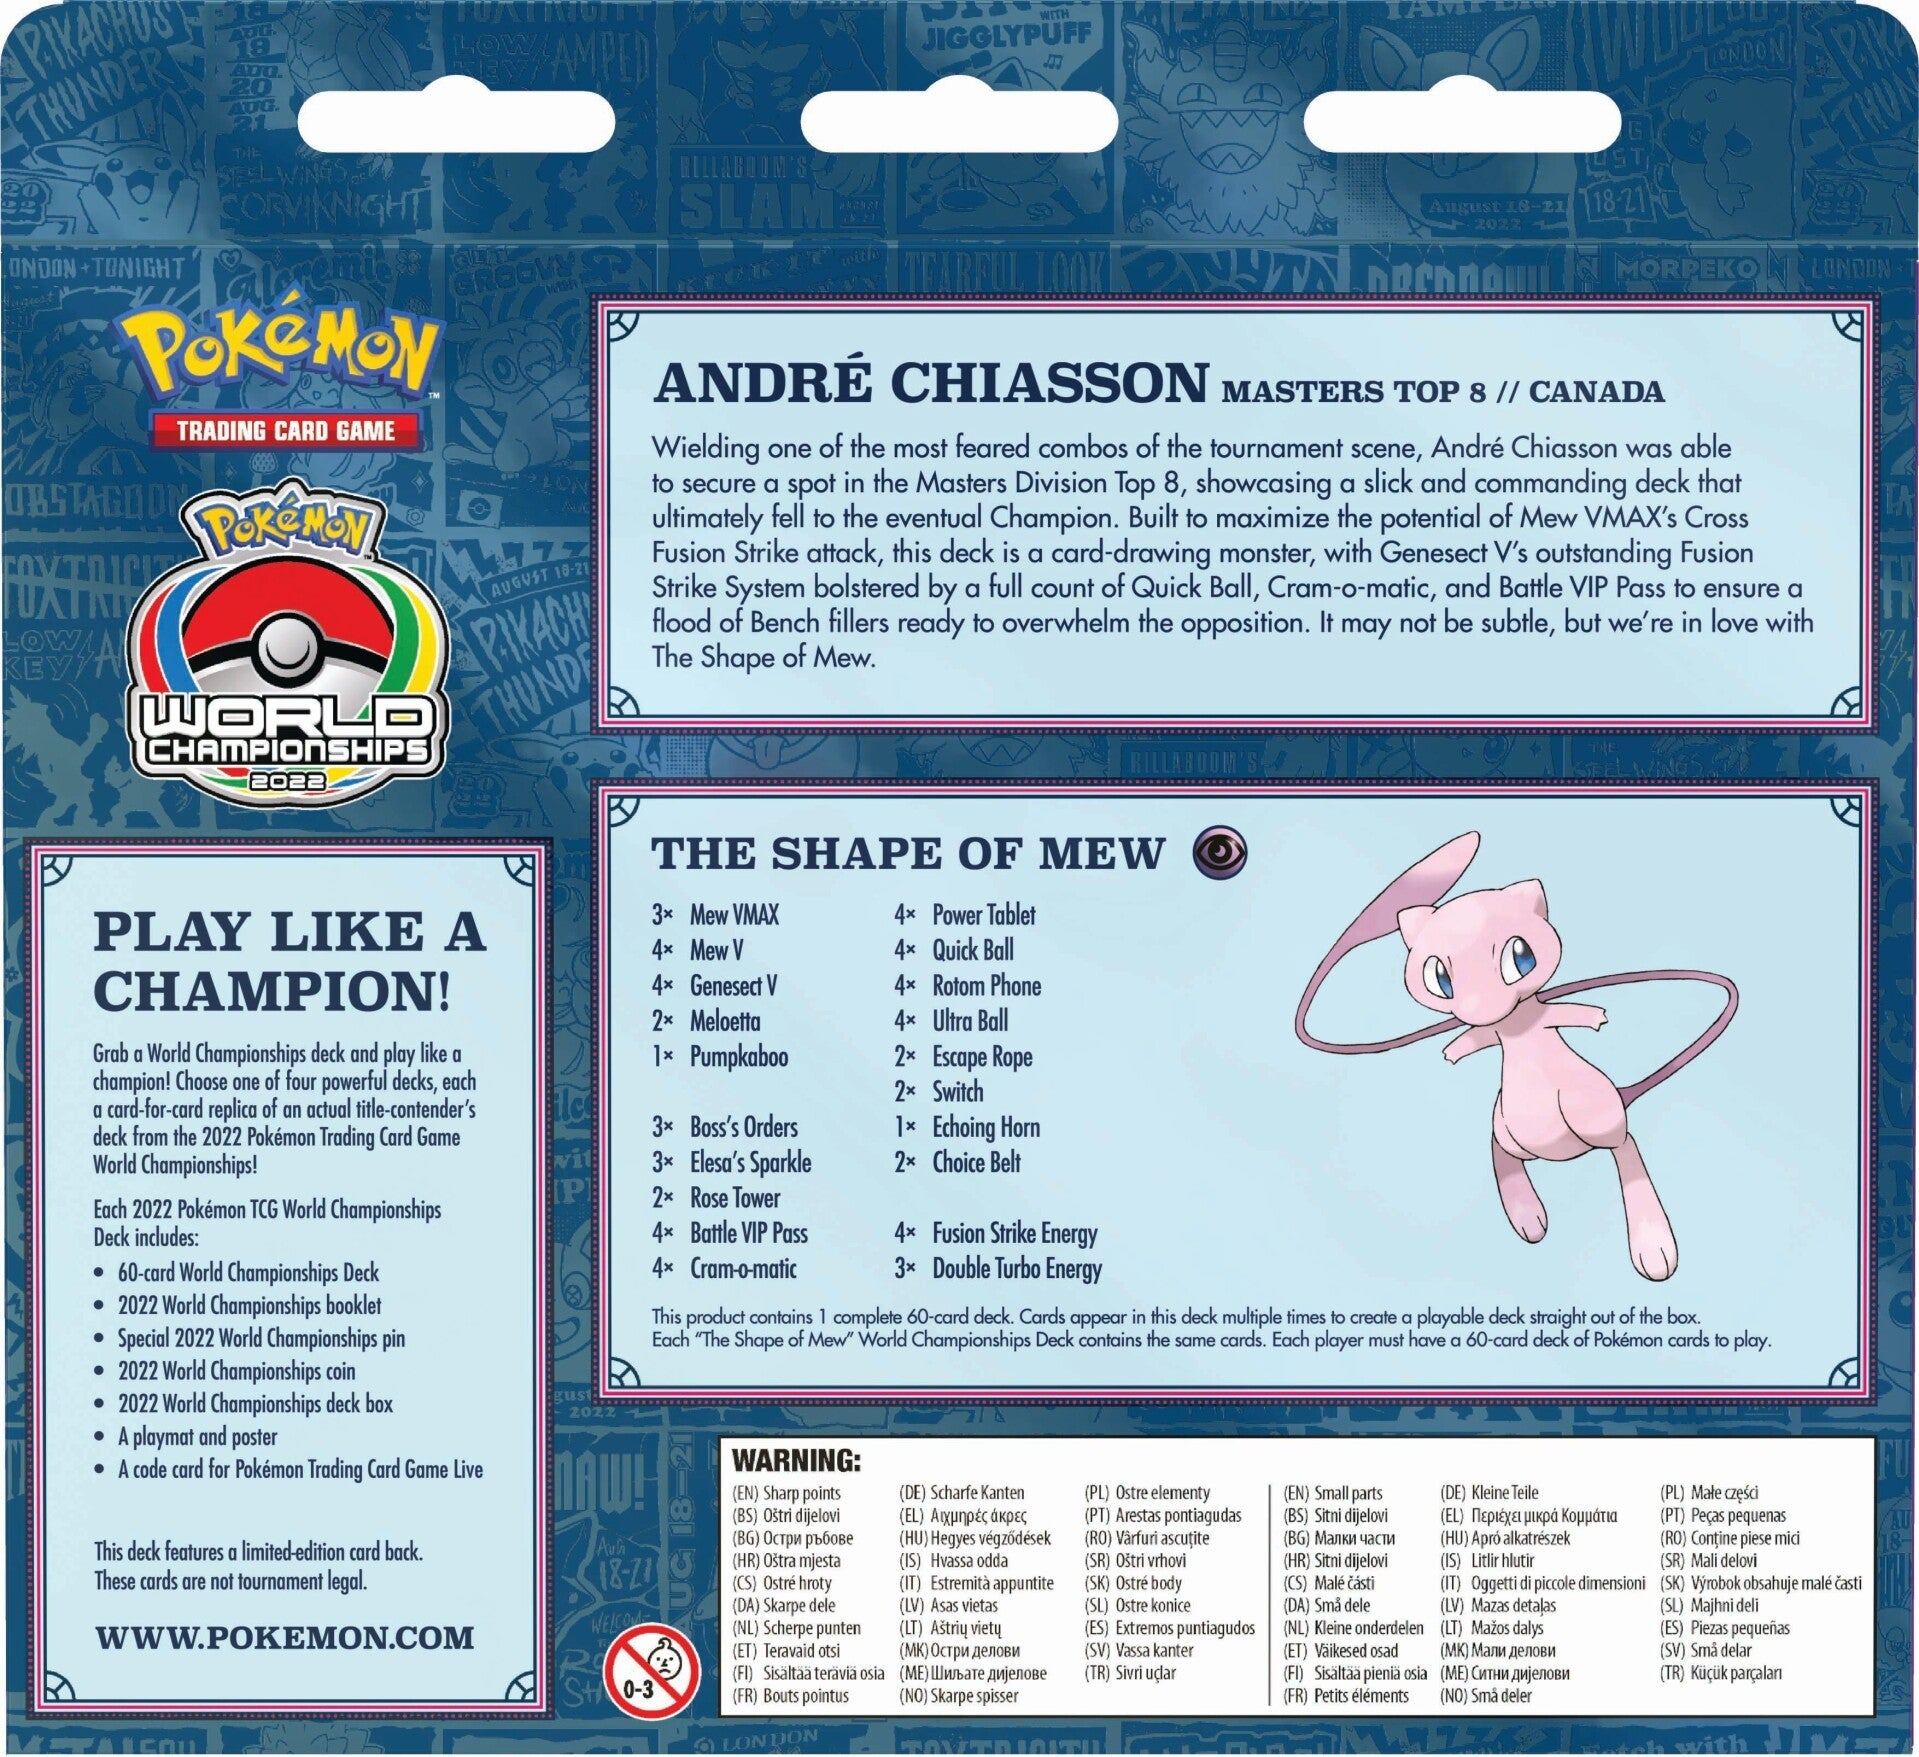 2022 World Championships Deck (The Shape of Mew - Andre Chiasson)